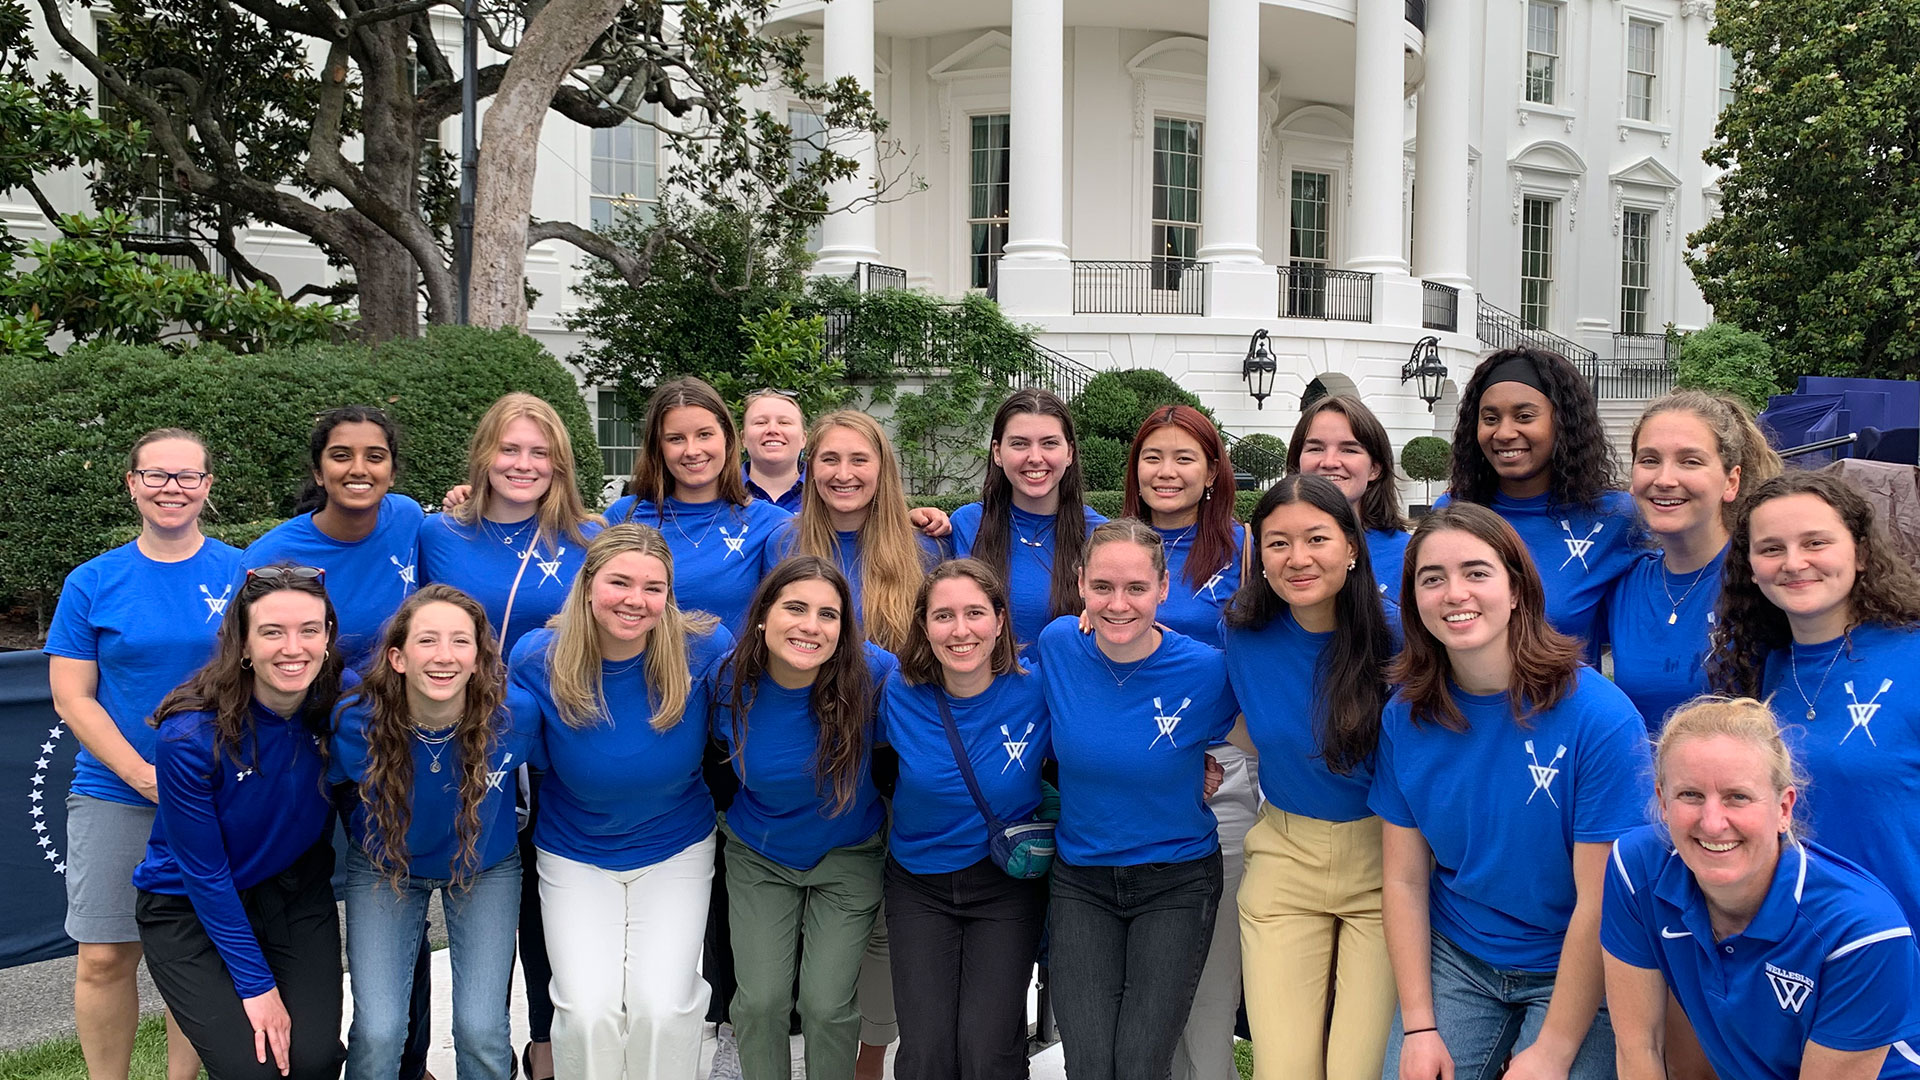 National Champion Blue Crew attended College Athlete Day on Monday, June 12 at the White House